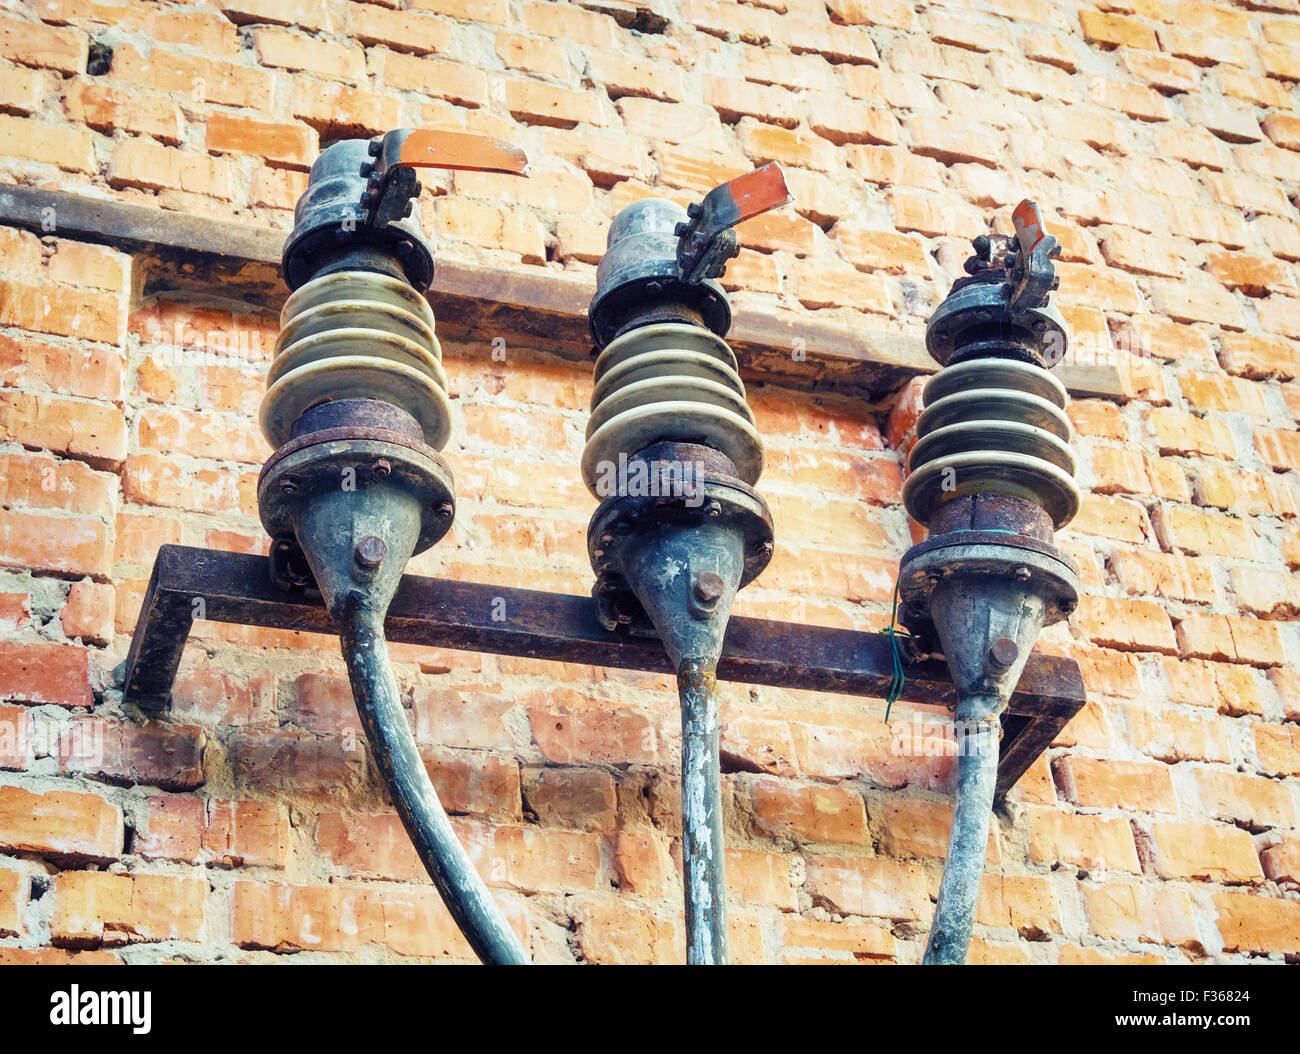 Old fuses on the wall of the brick building. Stock Photo